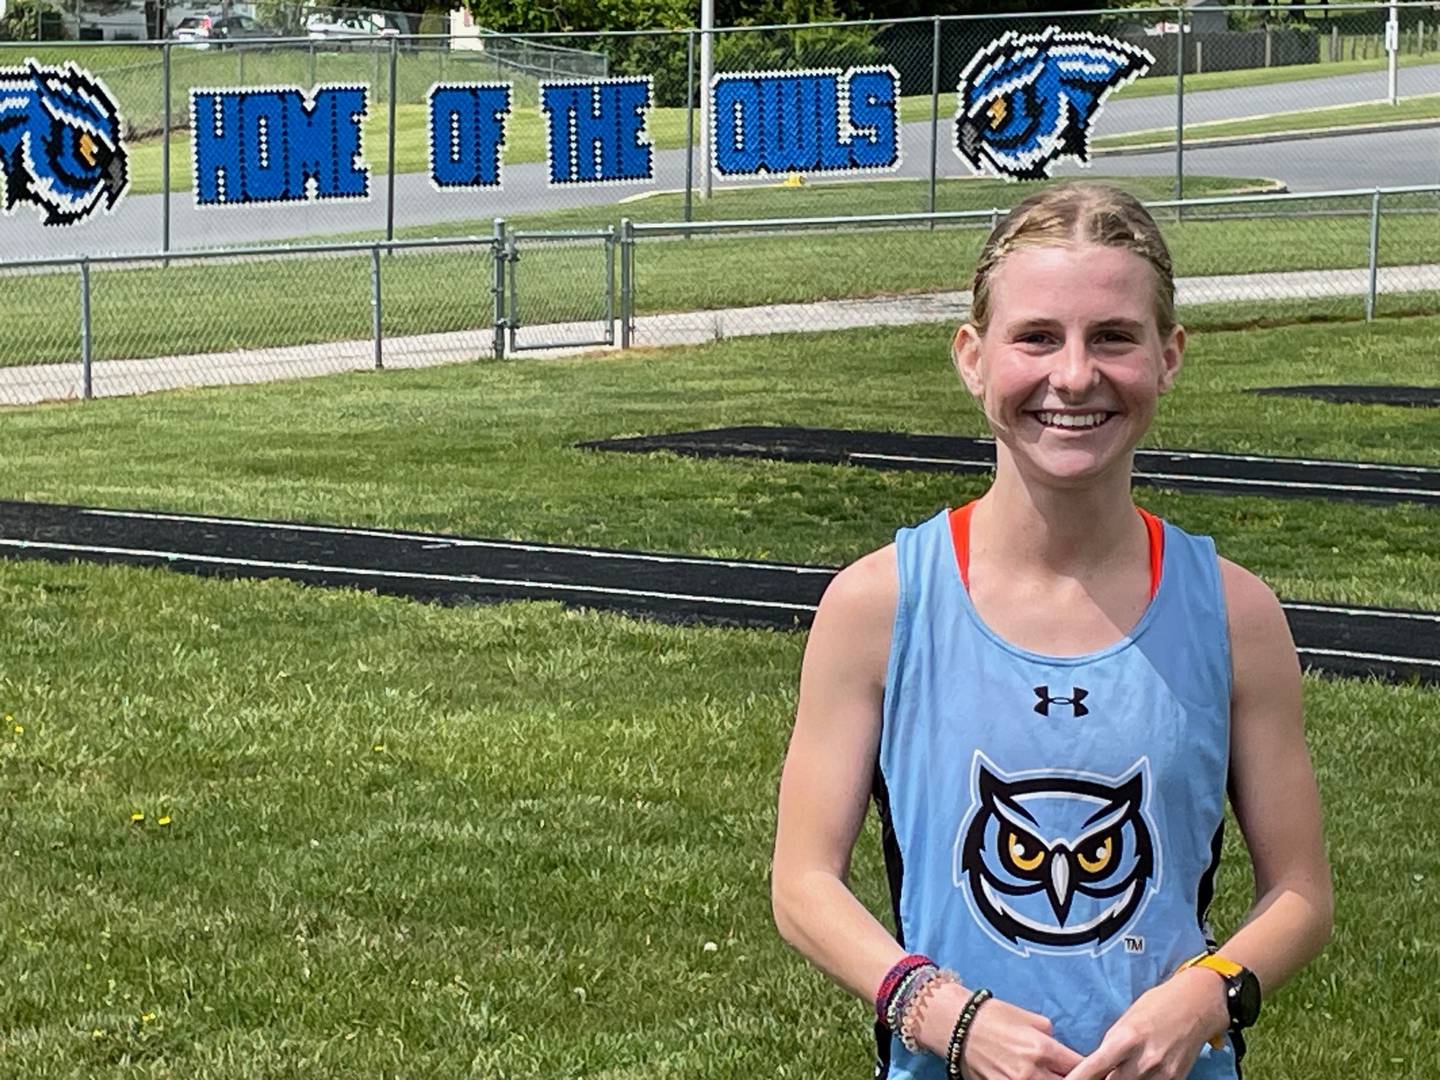 Westminster distance runner Hannah Toth hopes to finish her high school career with a few more gold medals as the track and field season moves into championship meets this week. The Class 3A state cross country champion prefers running on the track where she’s already won indoor state championships at 800 and 1,600 meters.